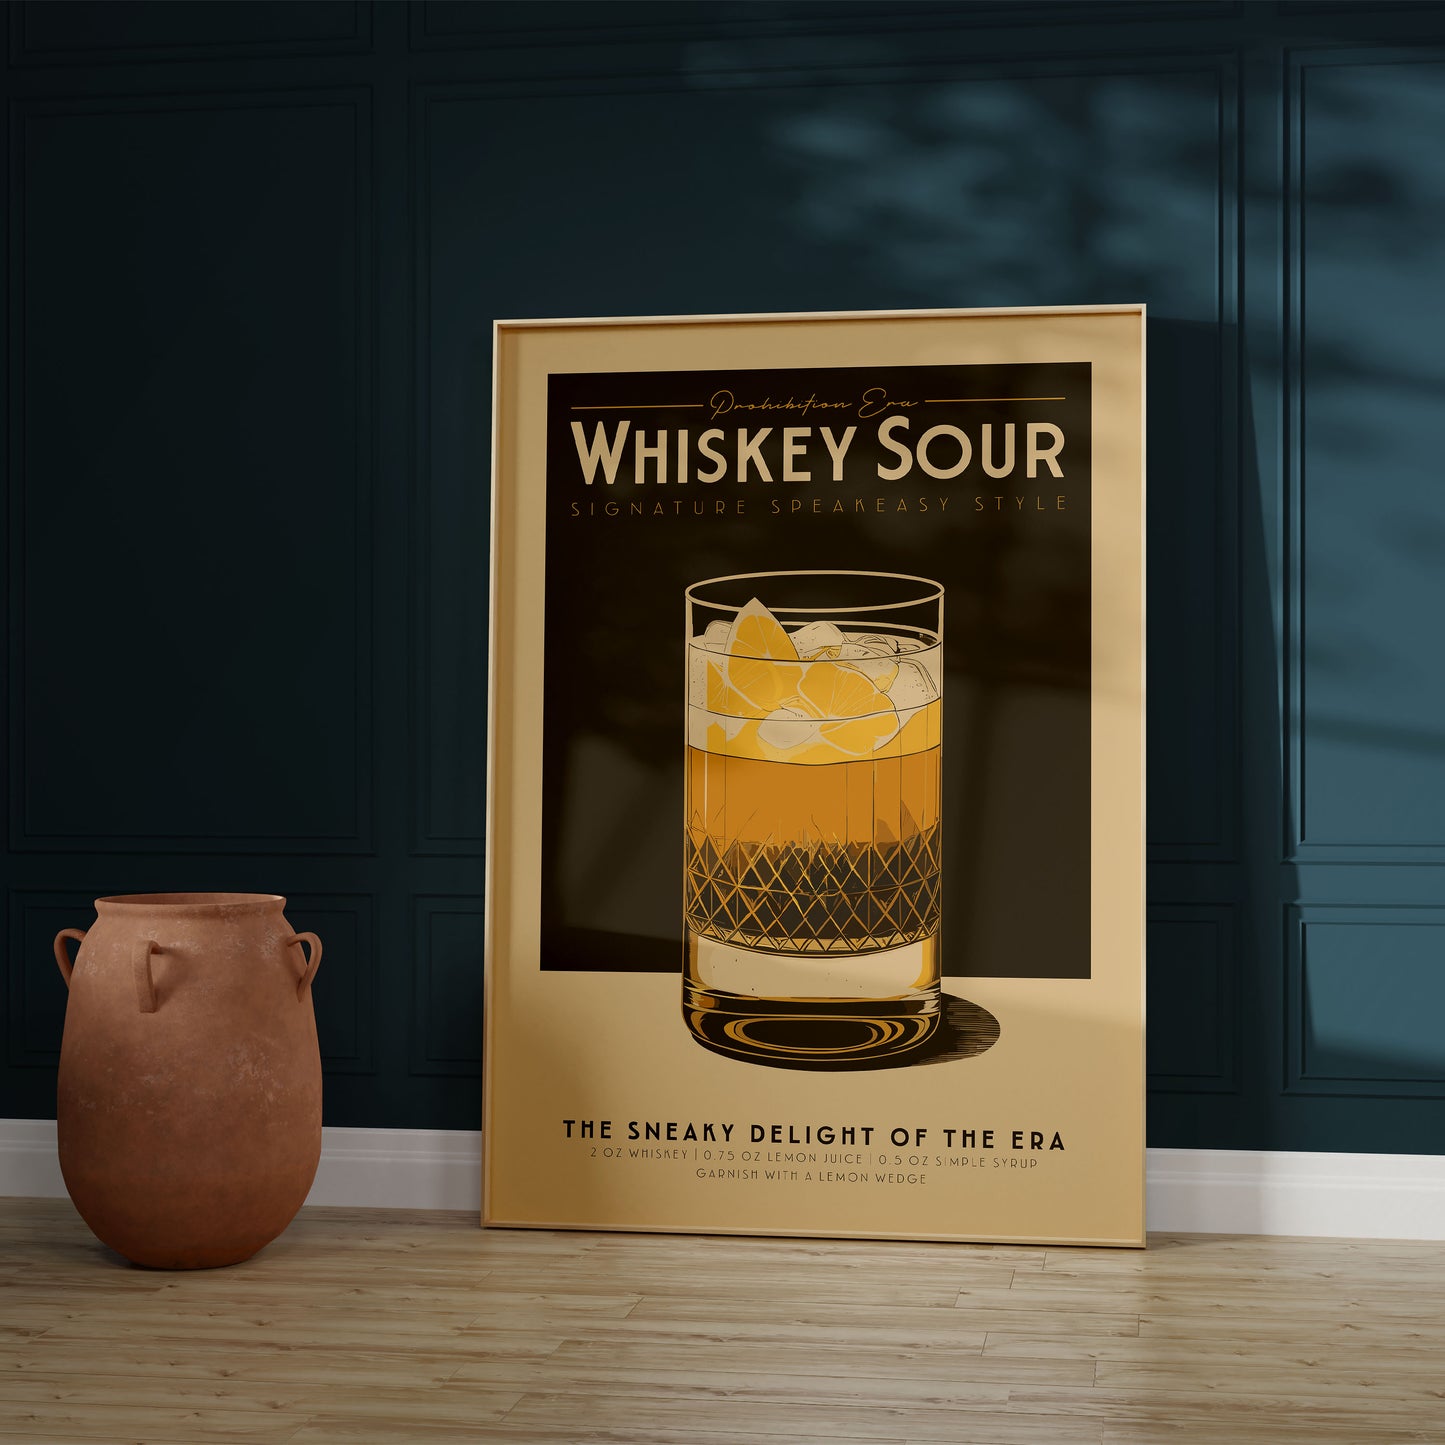 Whiskey Sour - Vintage Cocktail Poster